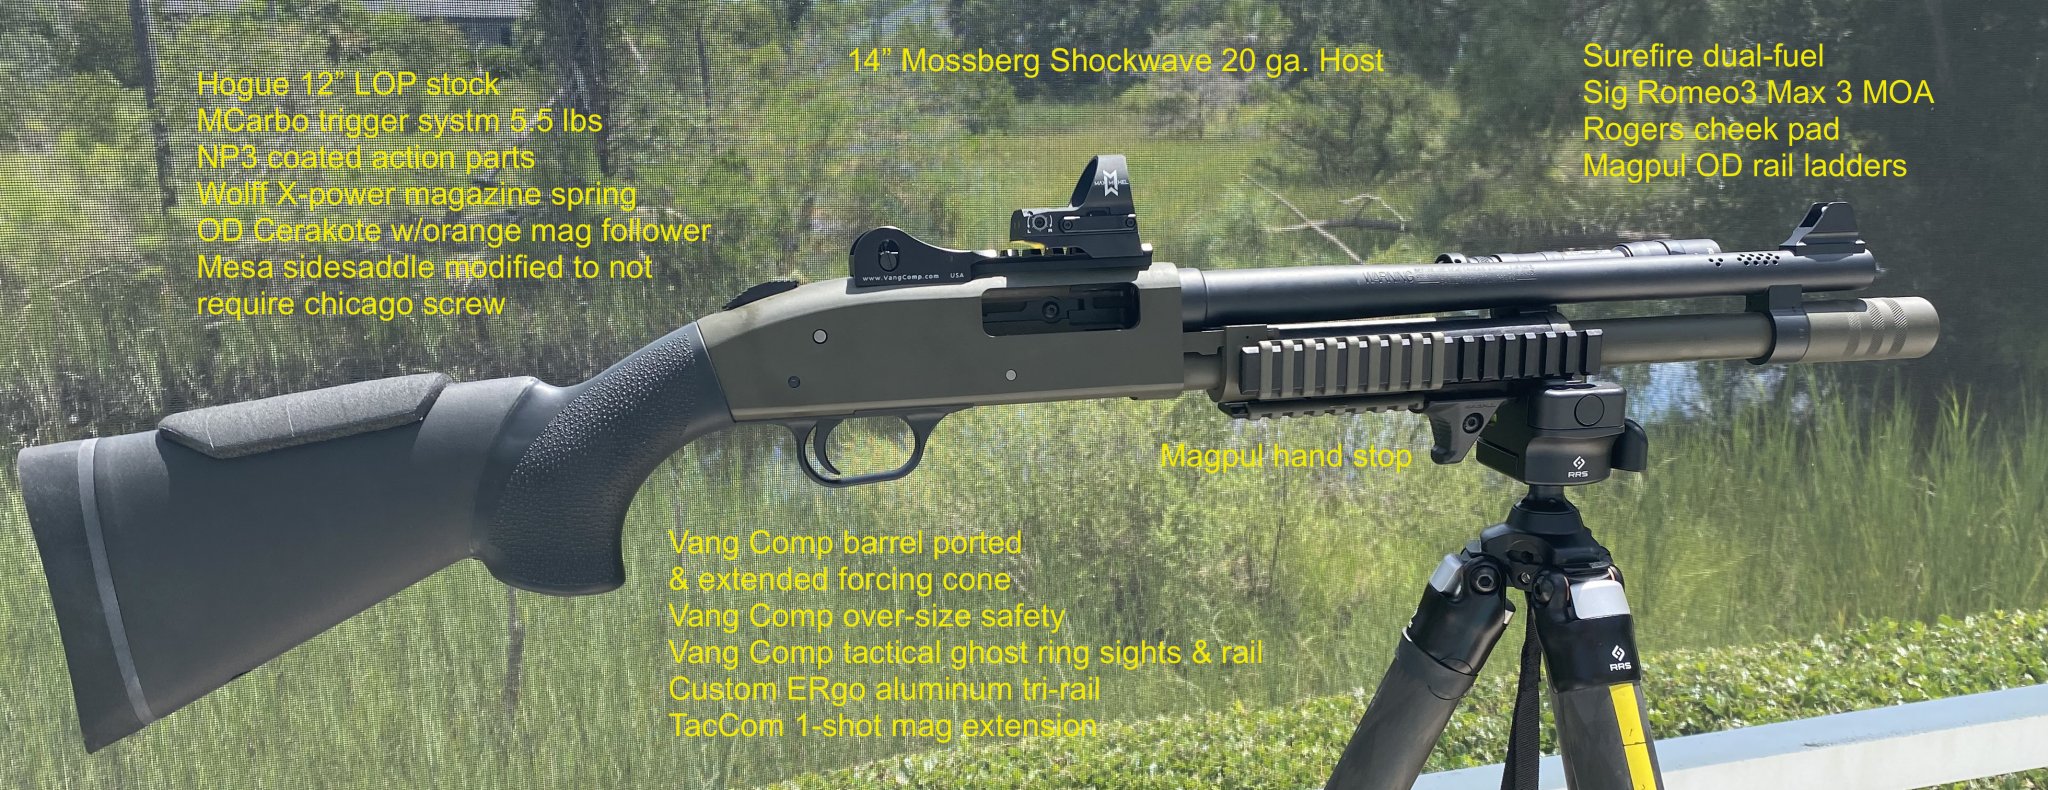 IMG_0499MOSSBERG 590 SHOCKWAVE ROMEO3 MAX RRS TRIPOD POOLSIDE 08.21.21 ANNOTATED copy 2.jpg